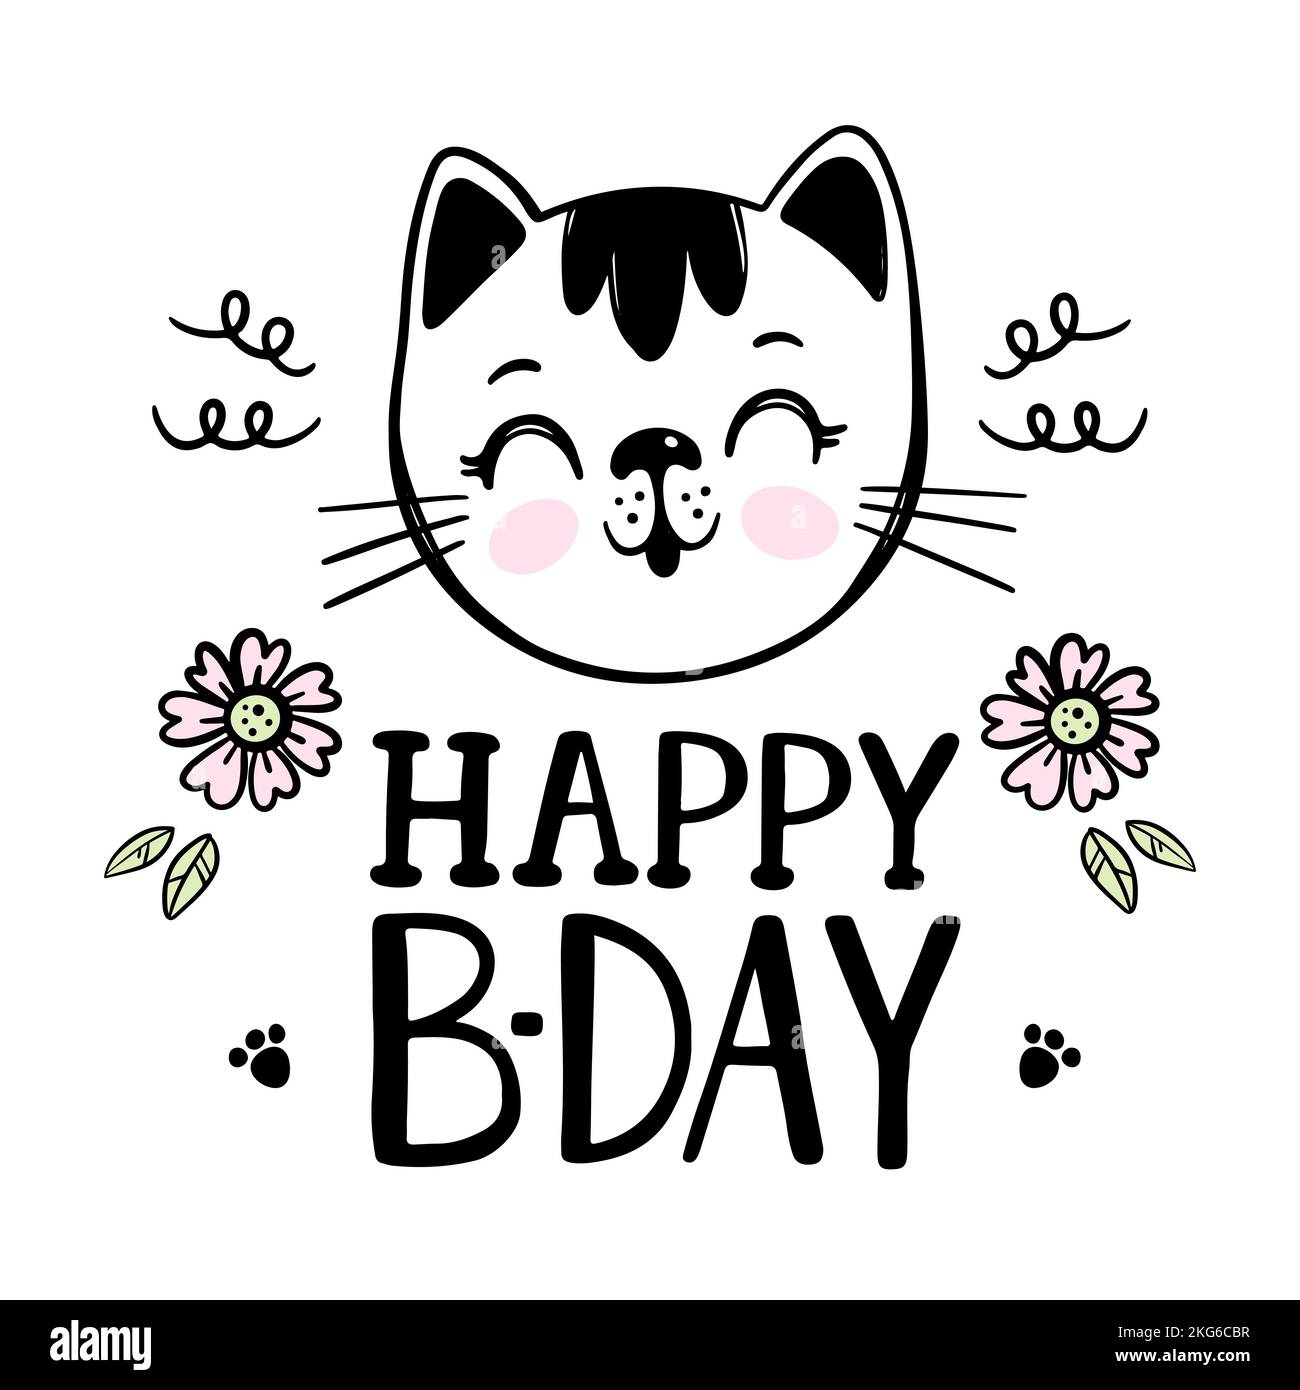 CAT Baby Birthday Cute Kitten Festive Greeting Card With Flowers Cartoon Hand Drawn Sketch With Handwriting Text Clip Art Vector Illustration For Prin Stock Vector